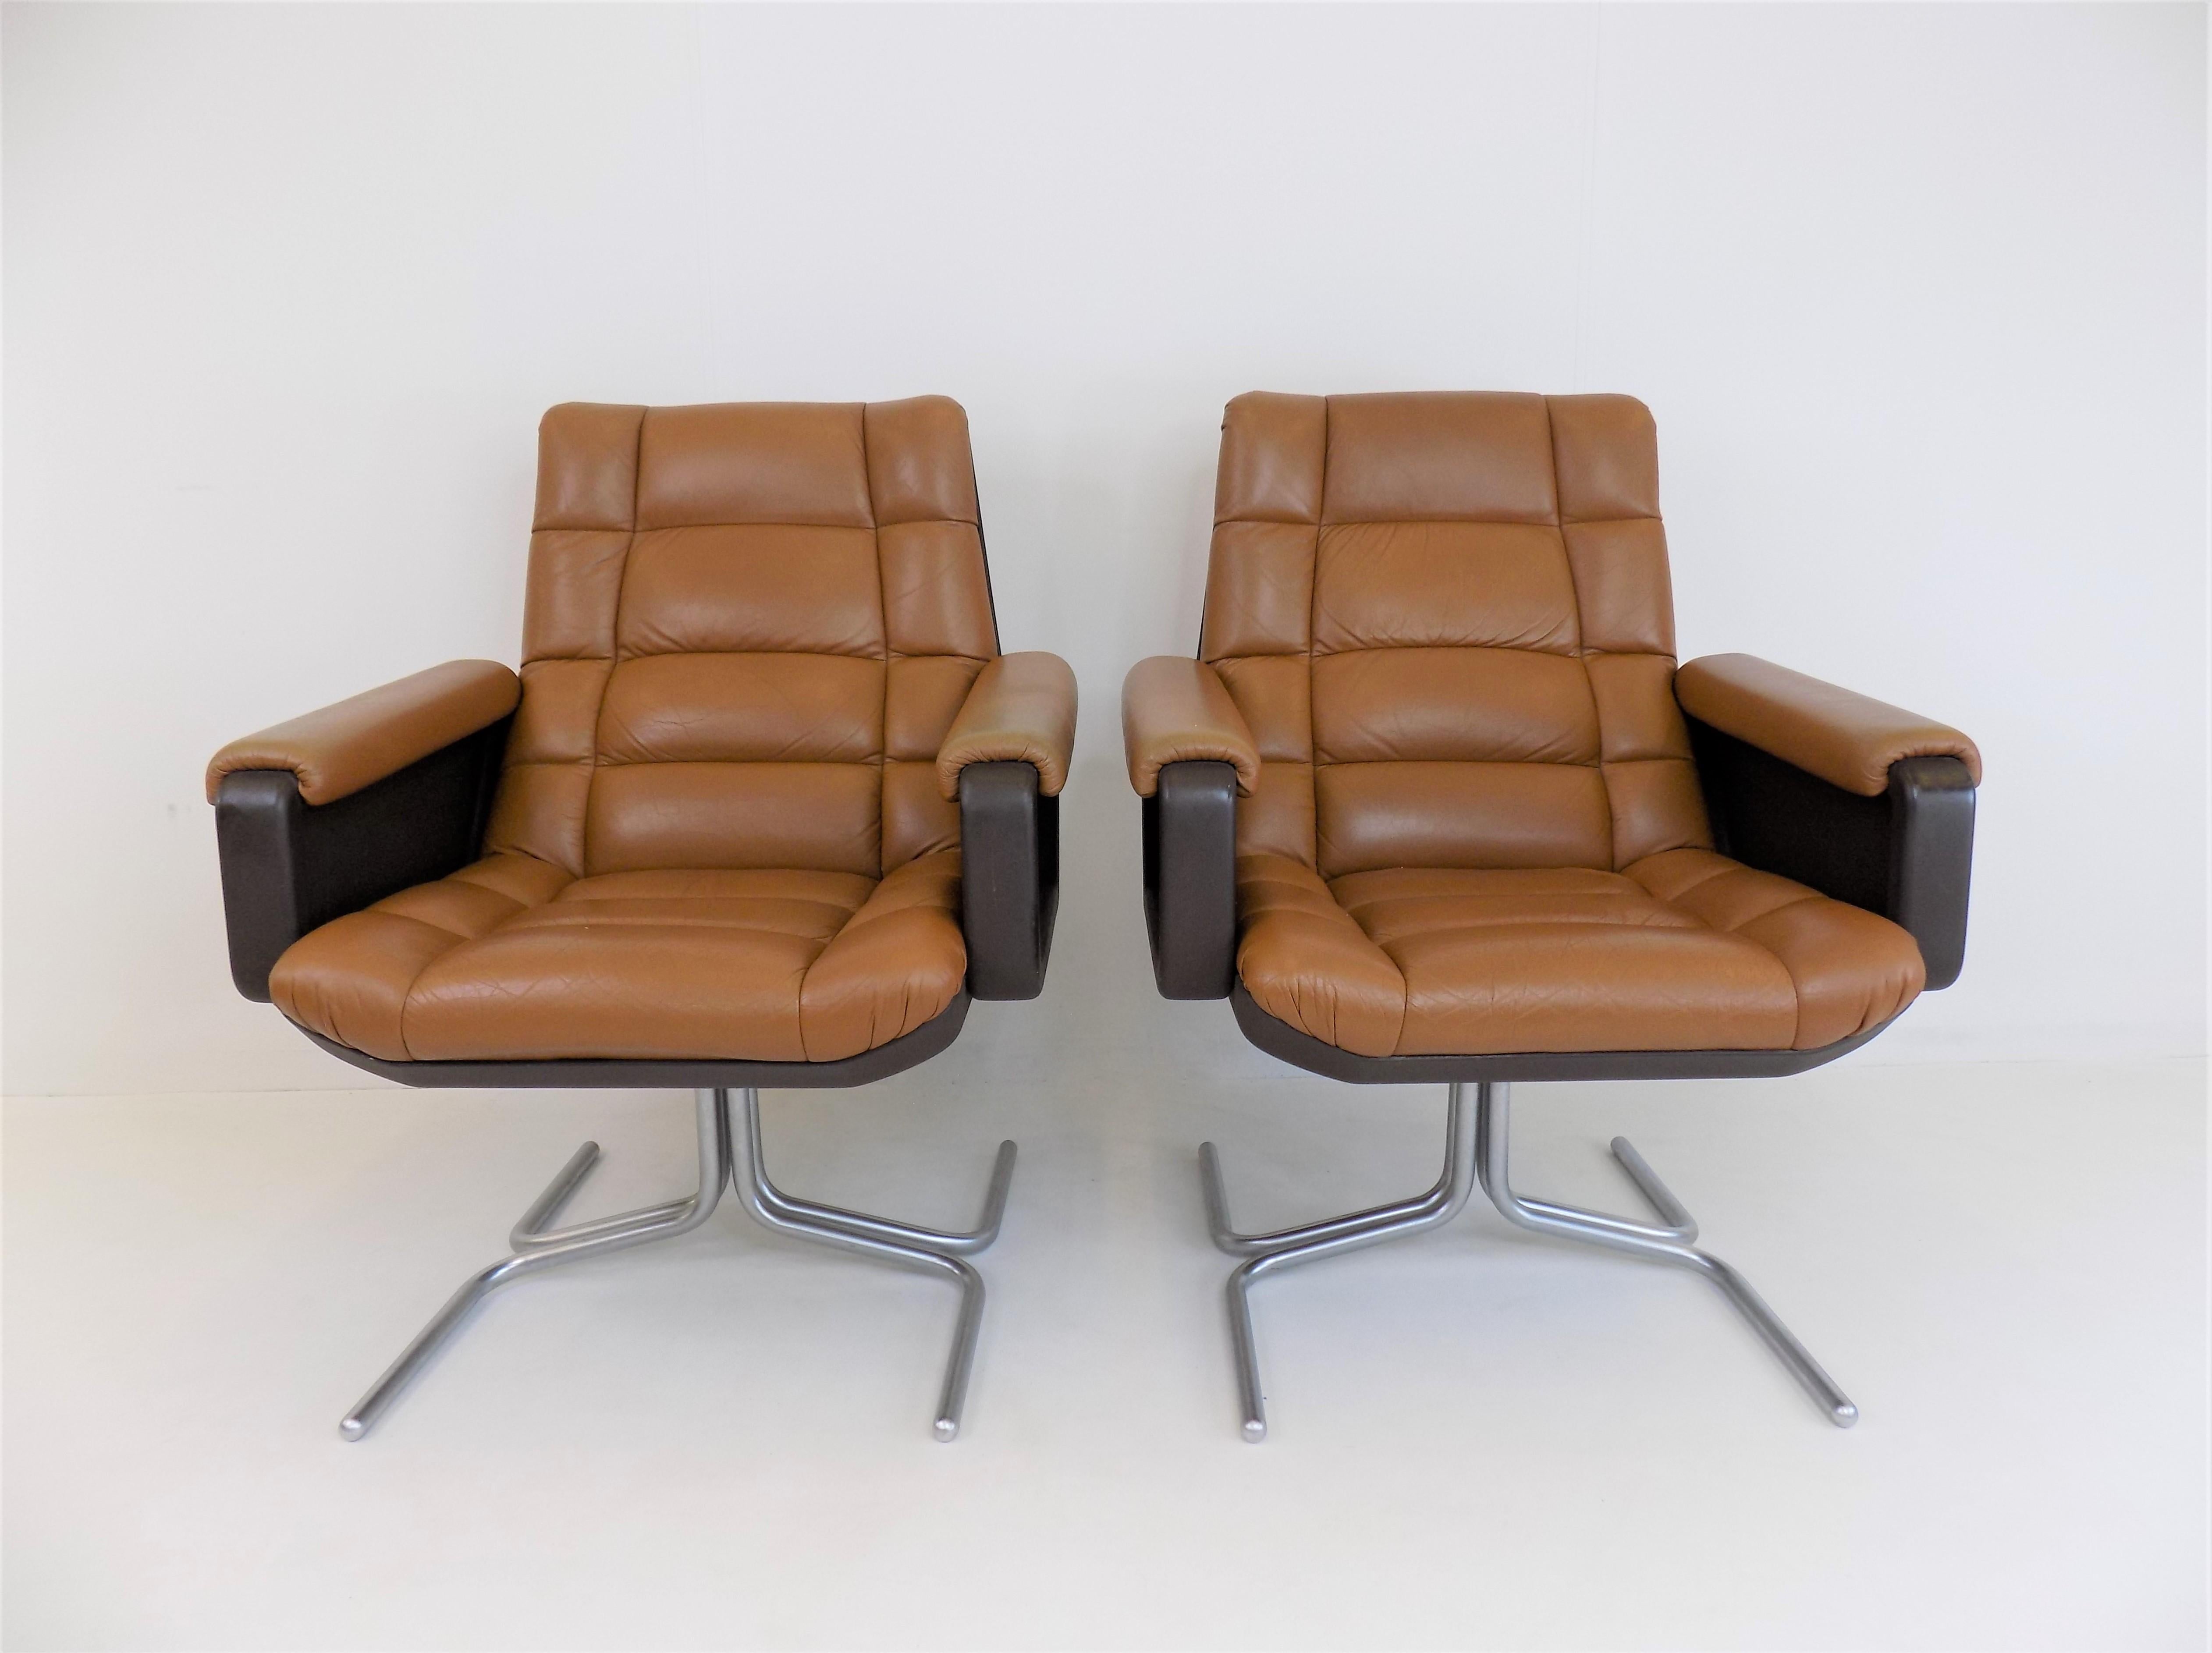 Set of 2 Mauser Seat 150 leather armchairs by Herbert Hirche 1